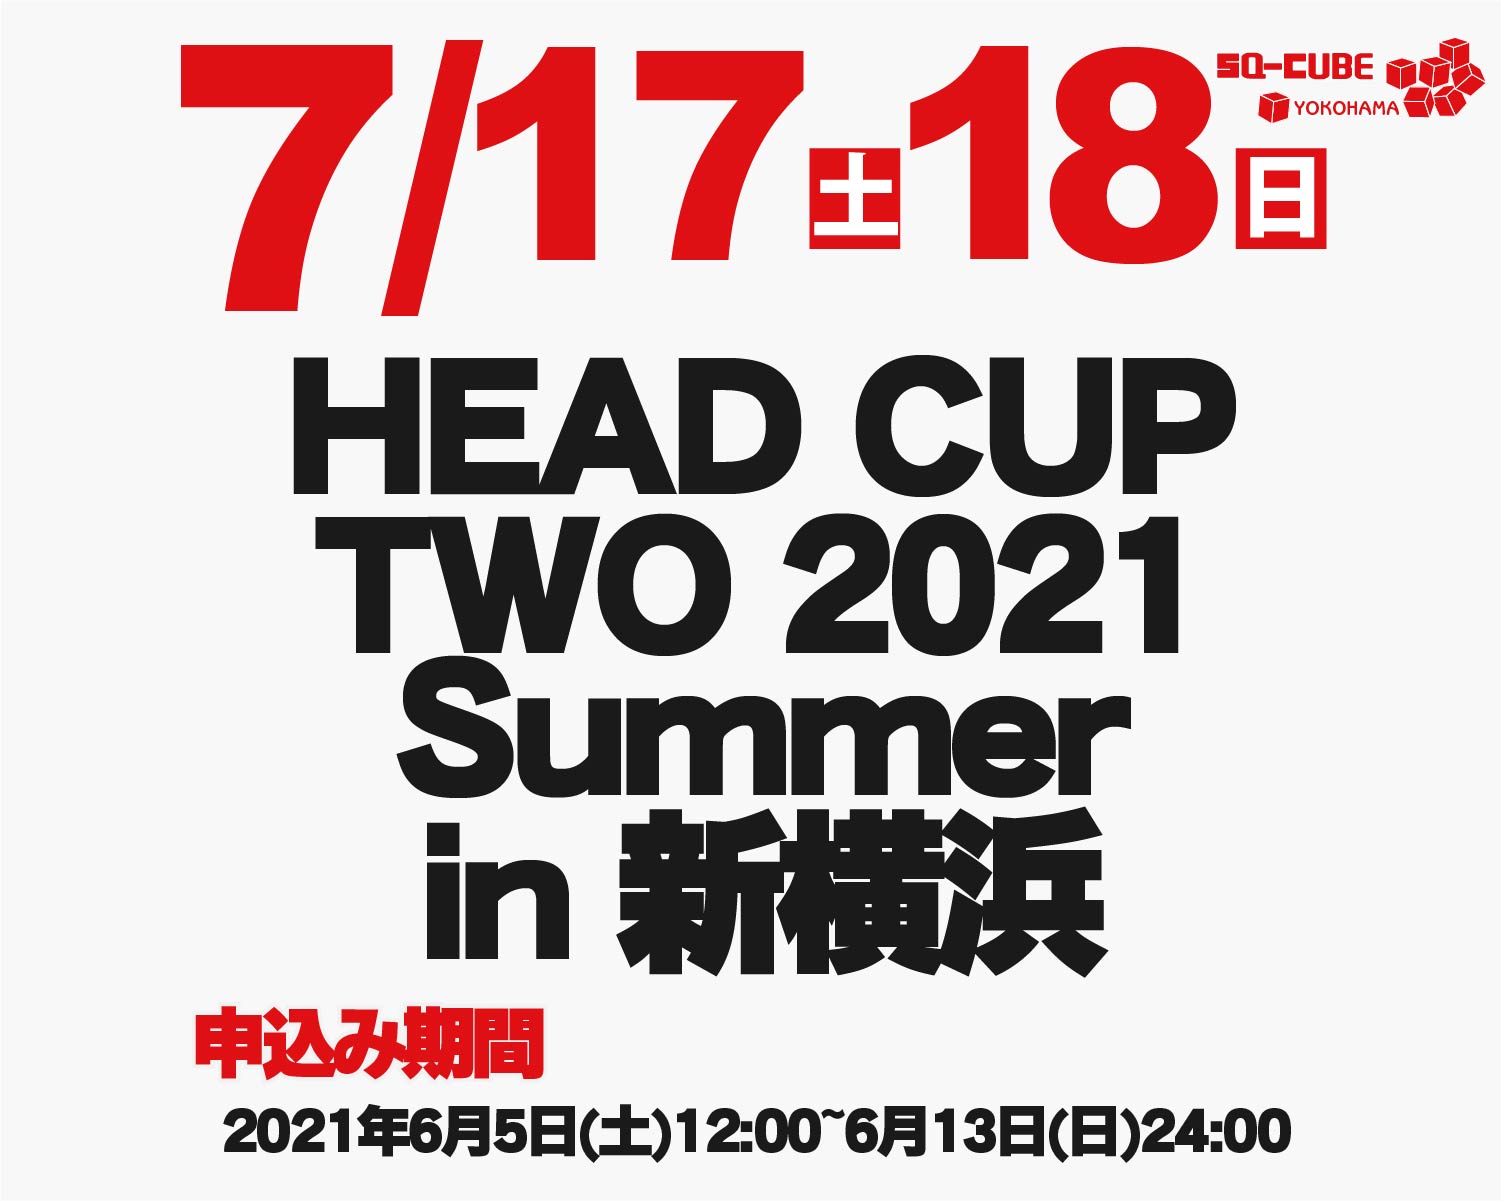 HEAD CUP TWO 2021 Summer in 新横浜